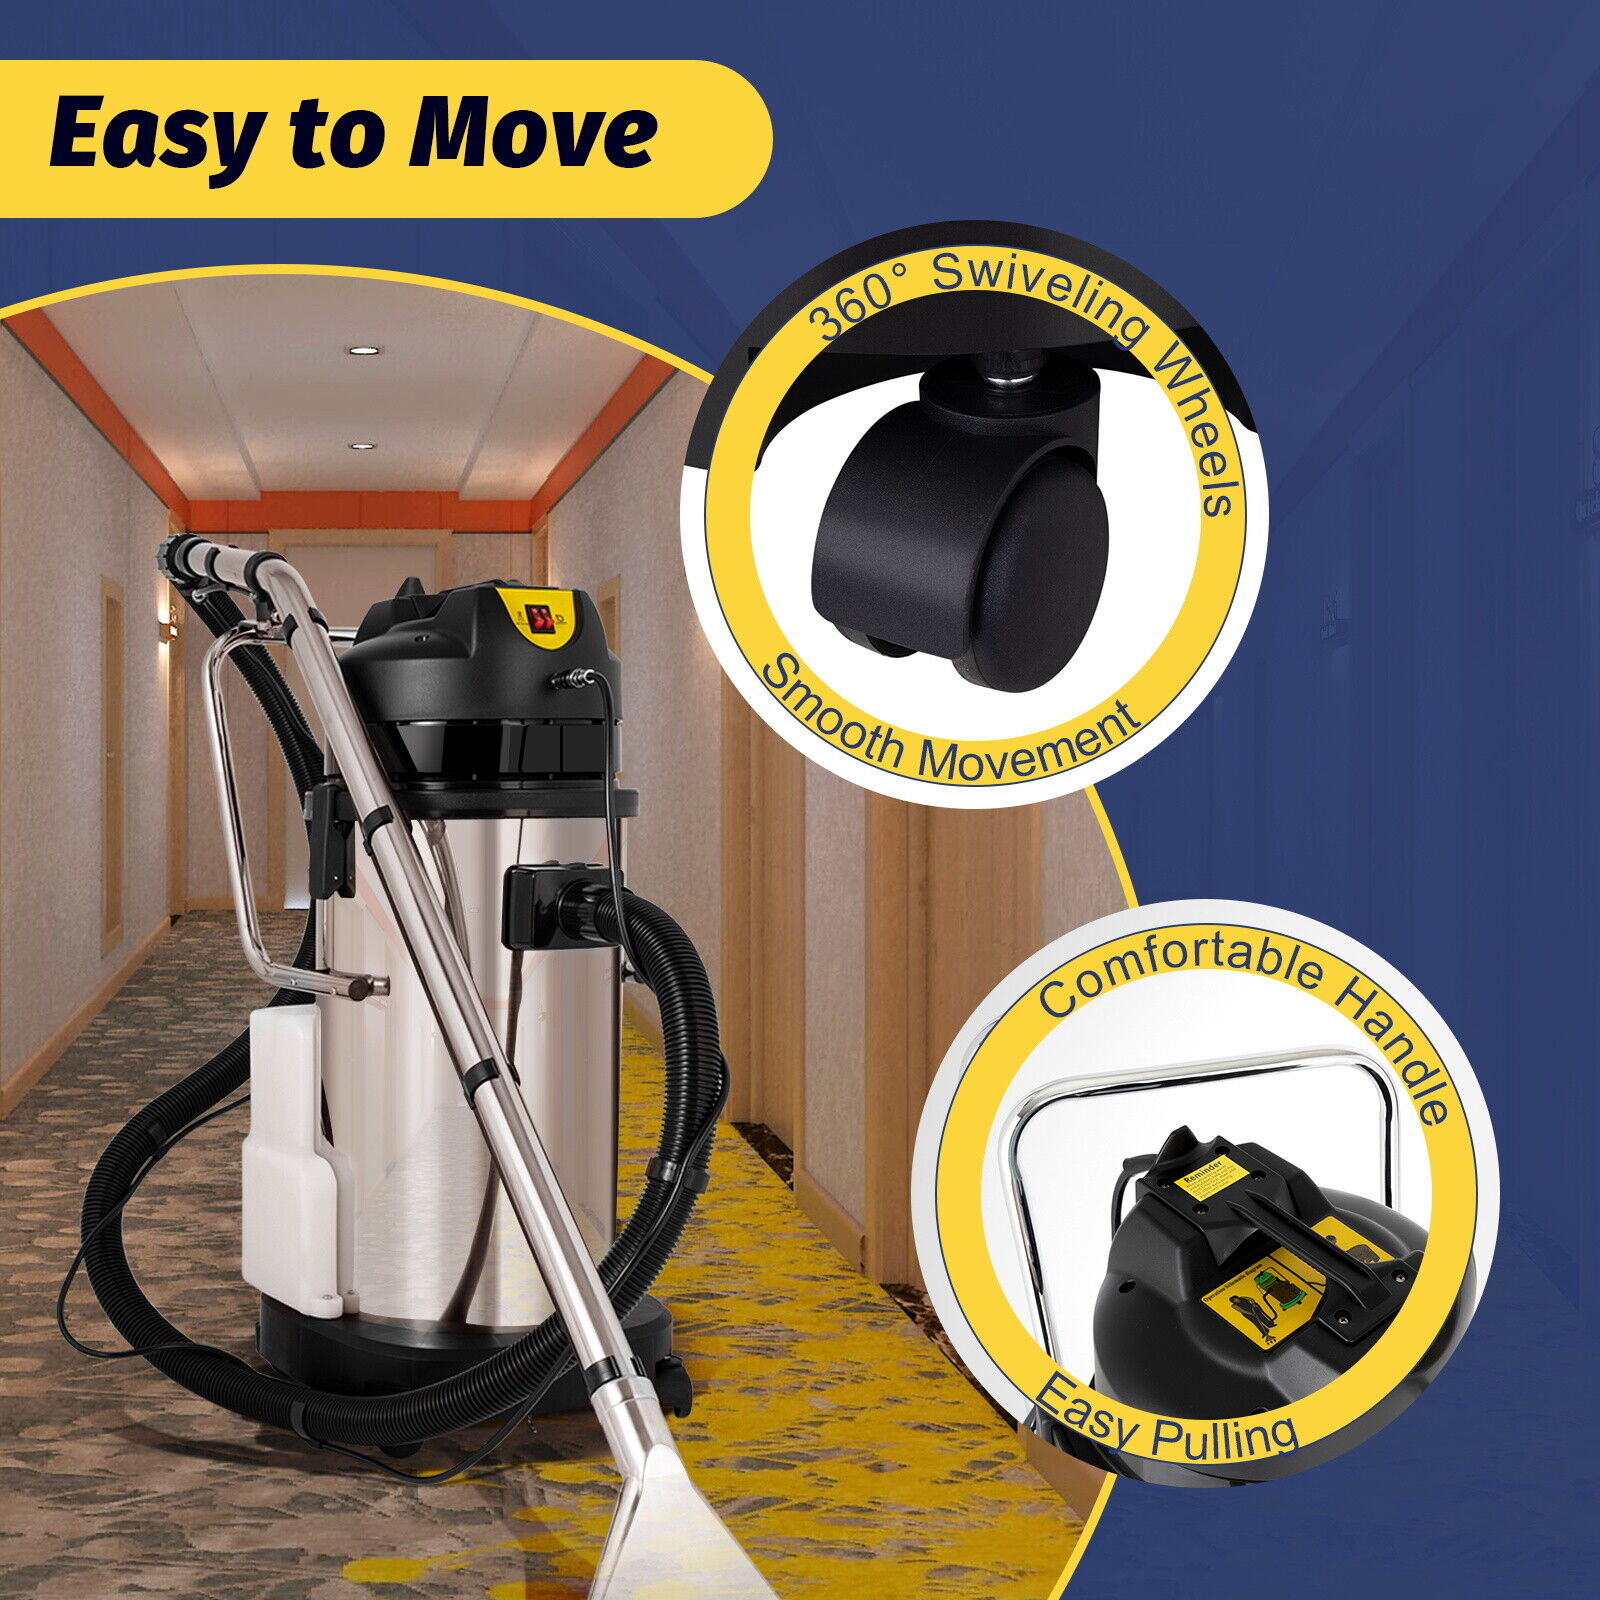 40L 3in1 Commercial Carpet Cleaning Machine Pro Cleaner Extractor Vacuum Cleaner